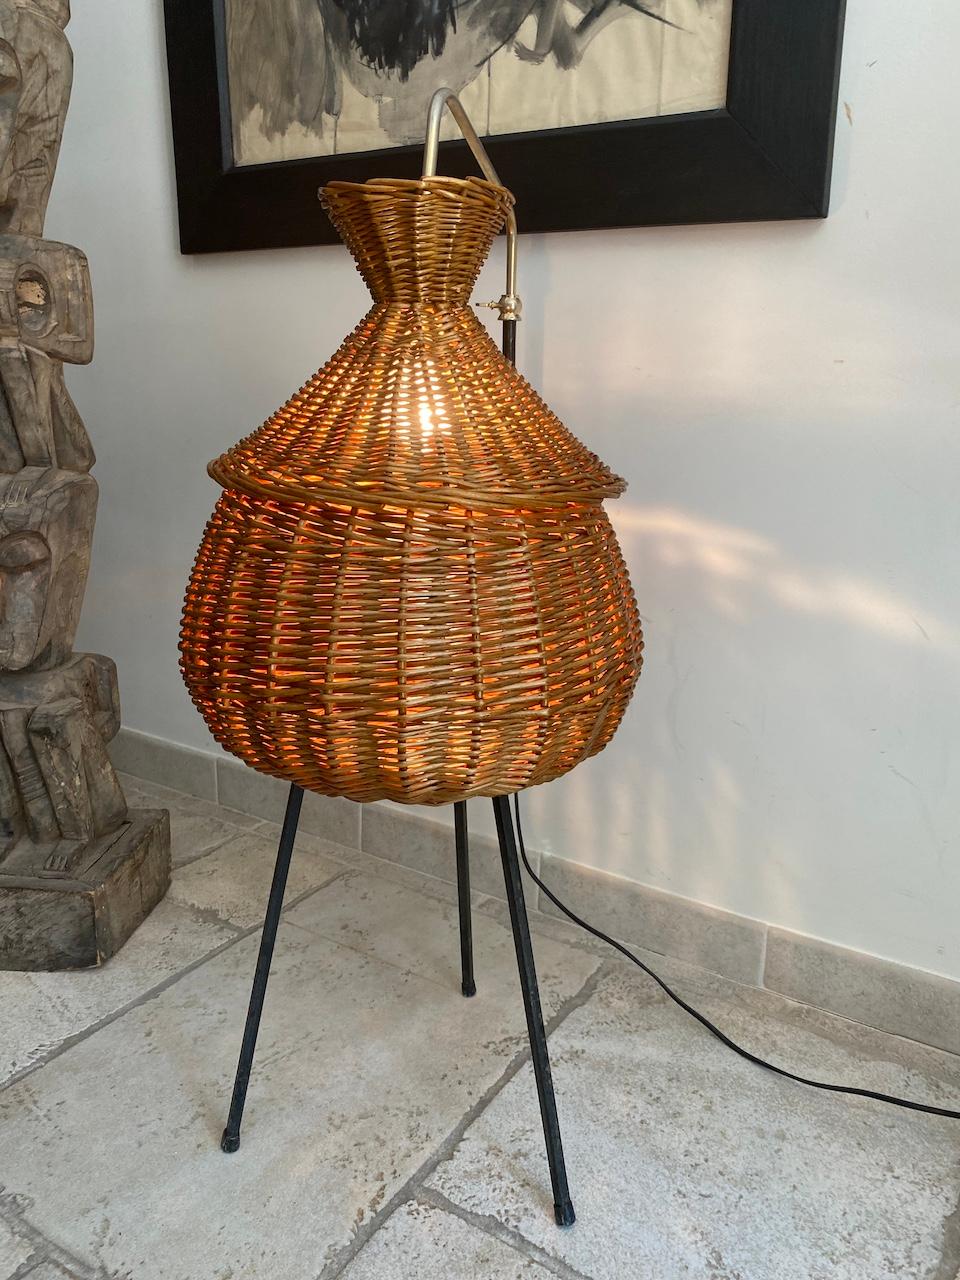 Floor lamp in the shape of an open or closed worker in rattan. It slides on a brass rod and can have several heights or positions. Wrought iron tripod base.